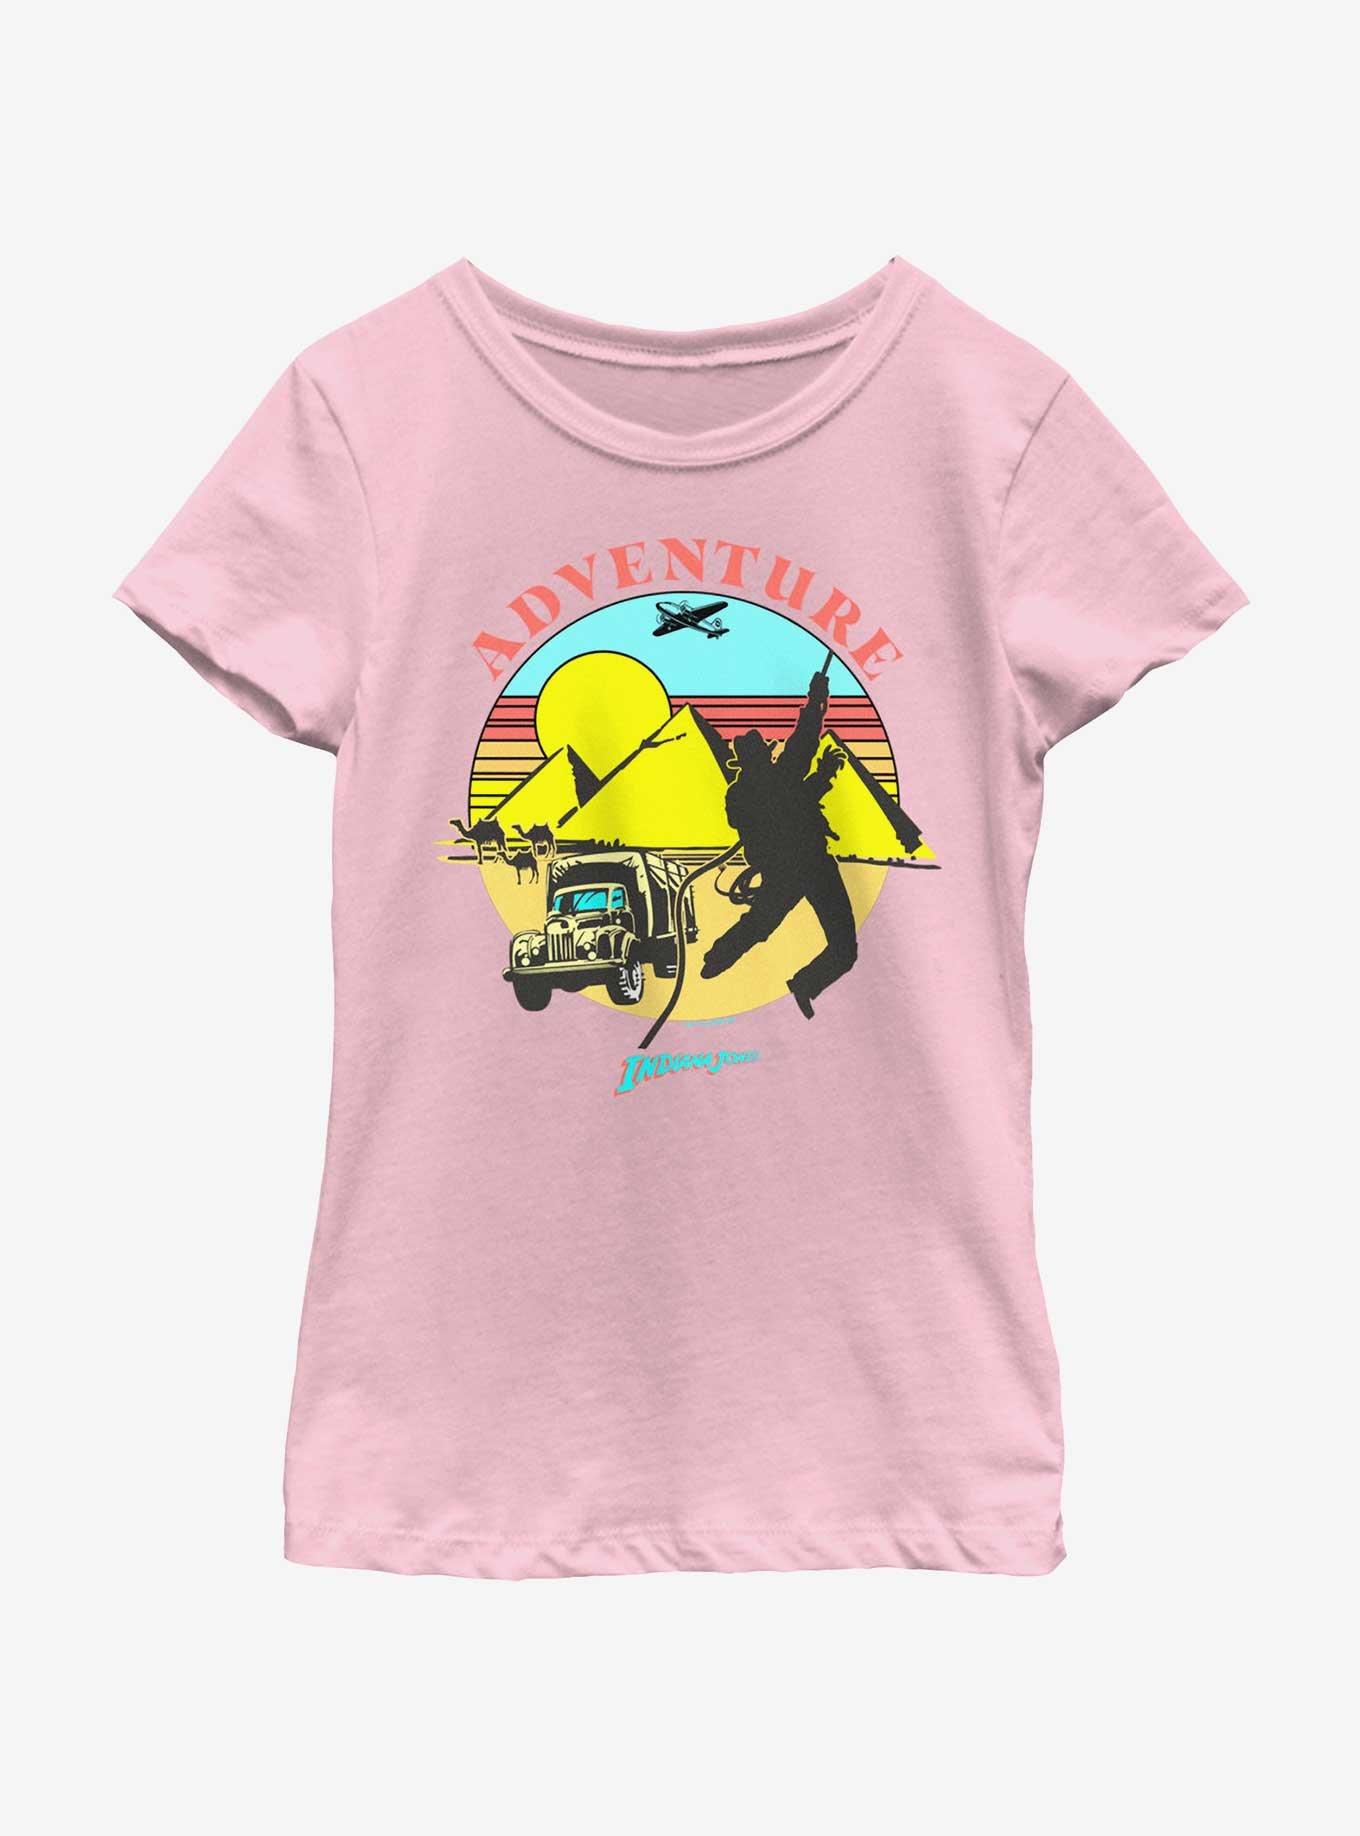 Indiana Jones The Desert Chase Adventure Youth Girls T-Shirt BoxLunch Web Exclusive, PINK, hi-res